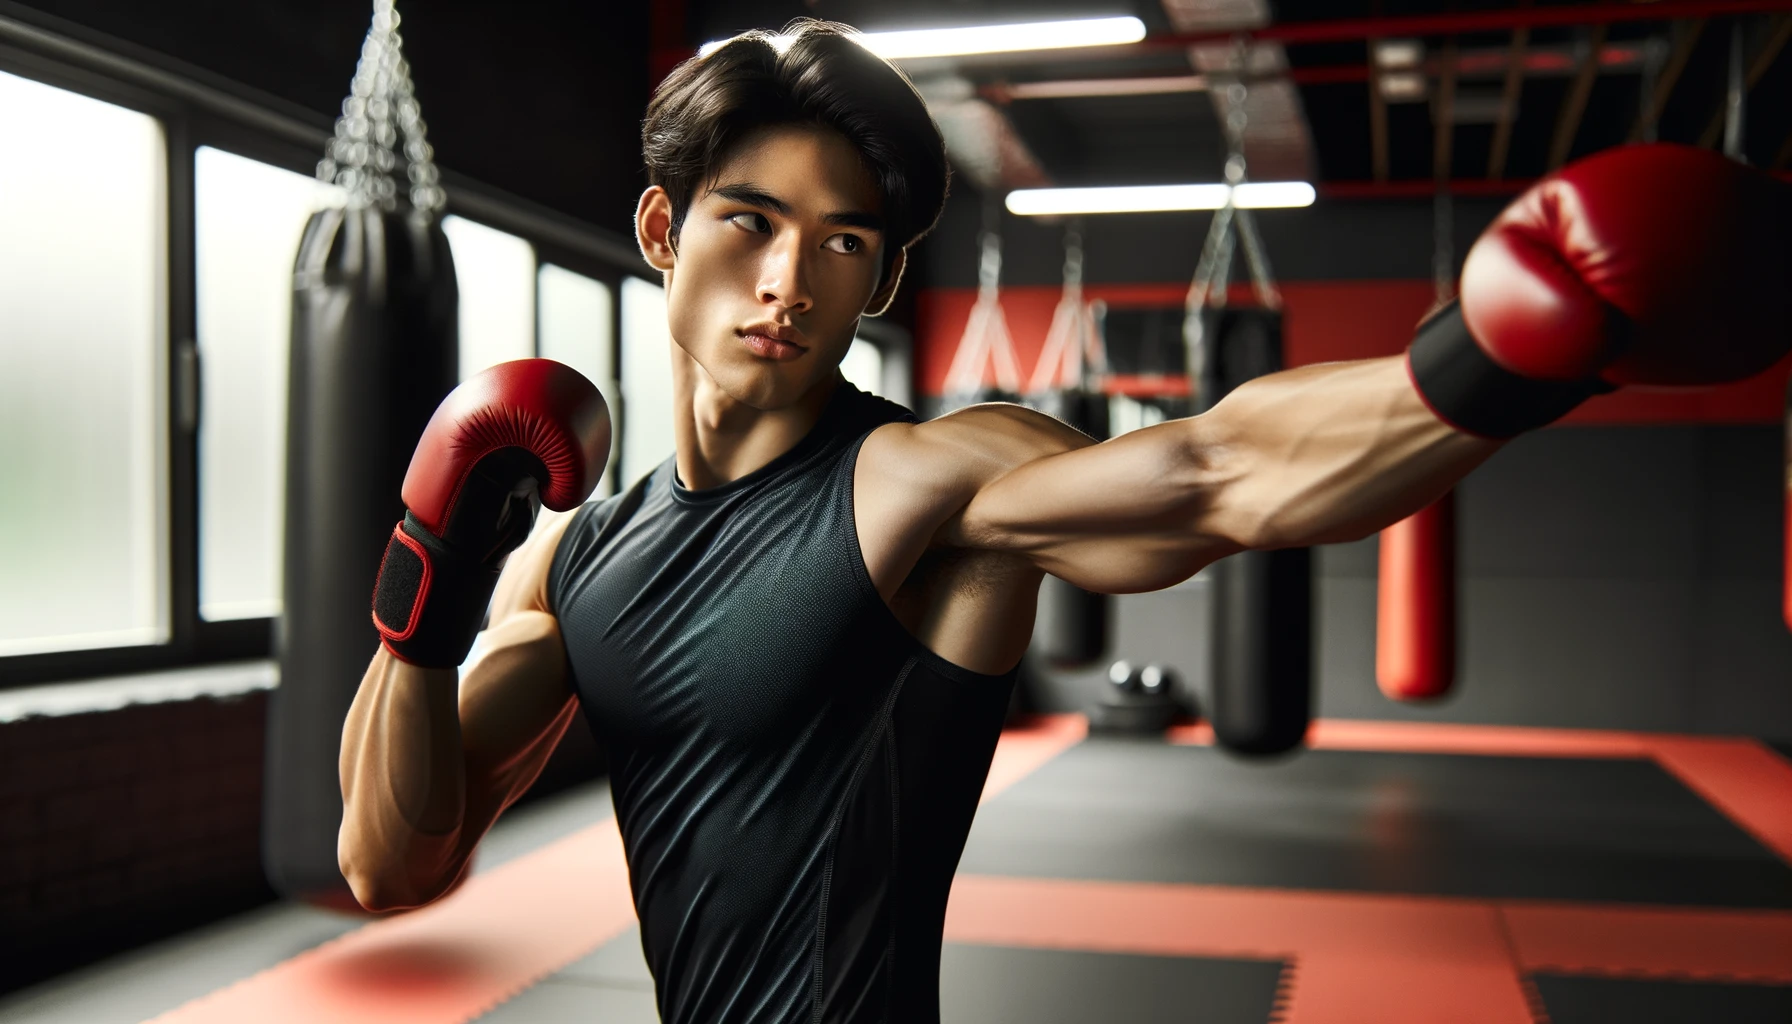 DALL·E 2023-11-21 12.07.25 - A full-body portrait of a young South Asian male in a martial arts gym, dynamically posed with his arm extended as if delivering a punch. He wears a s